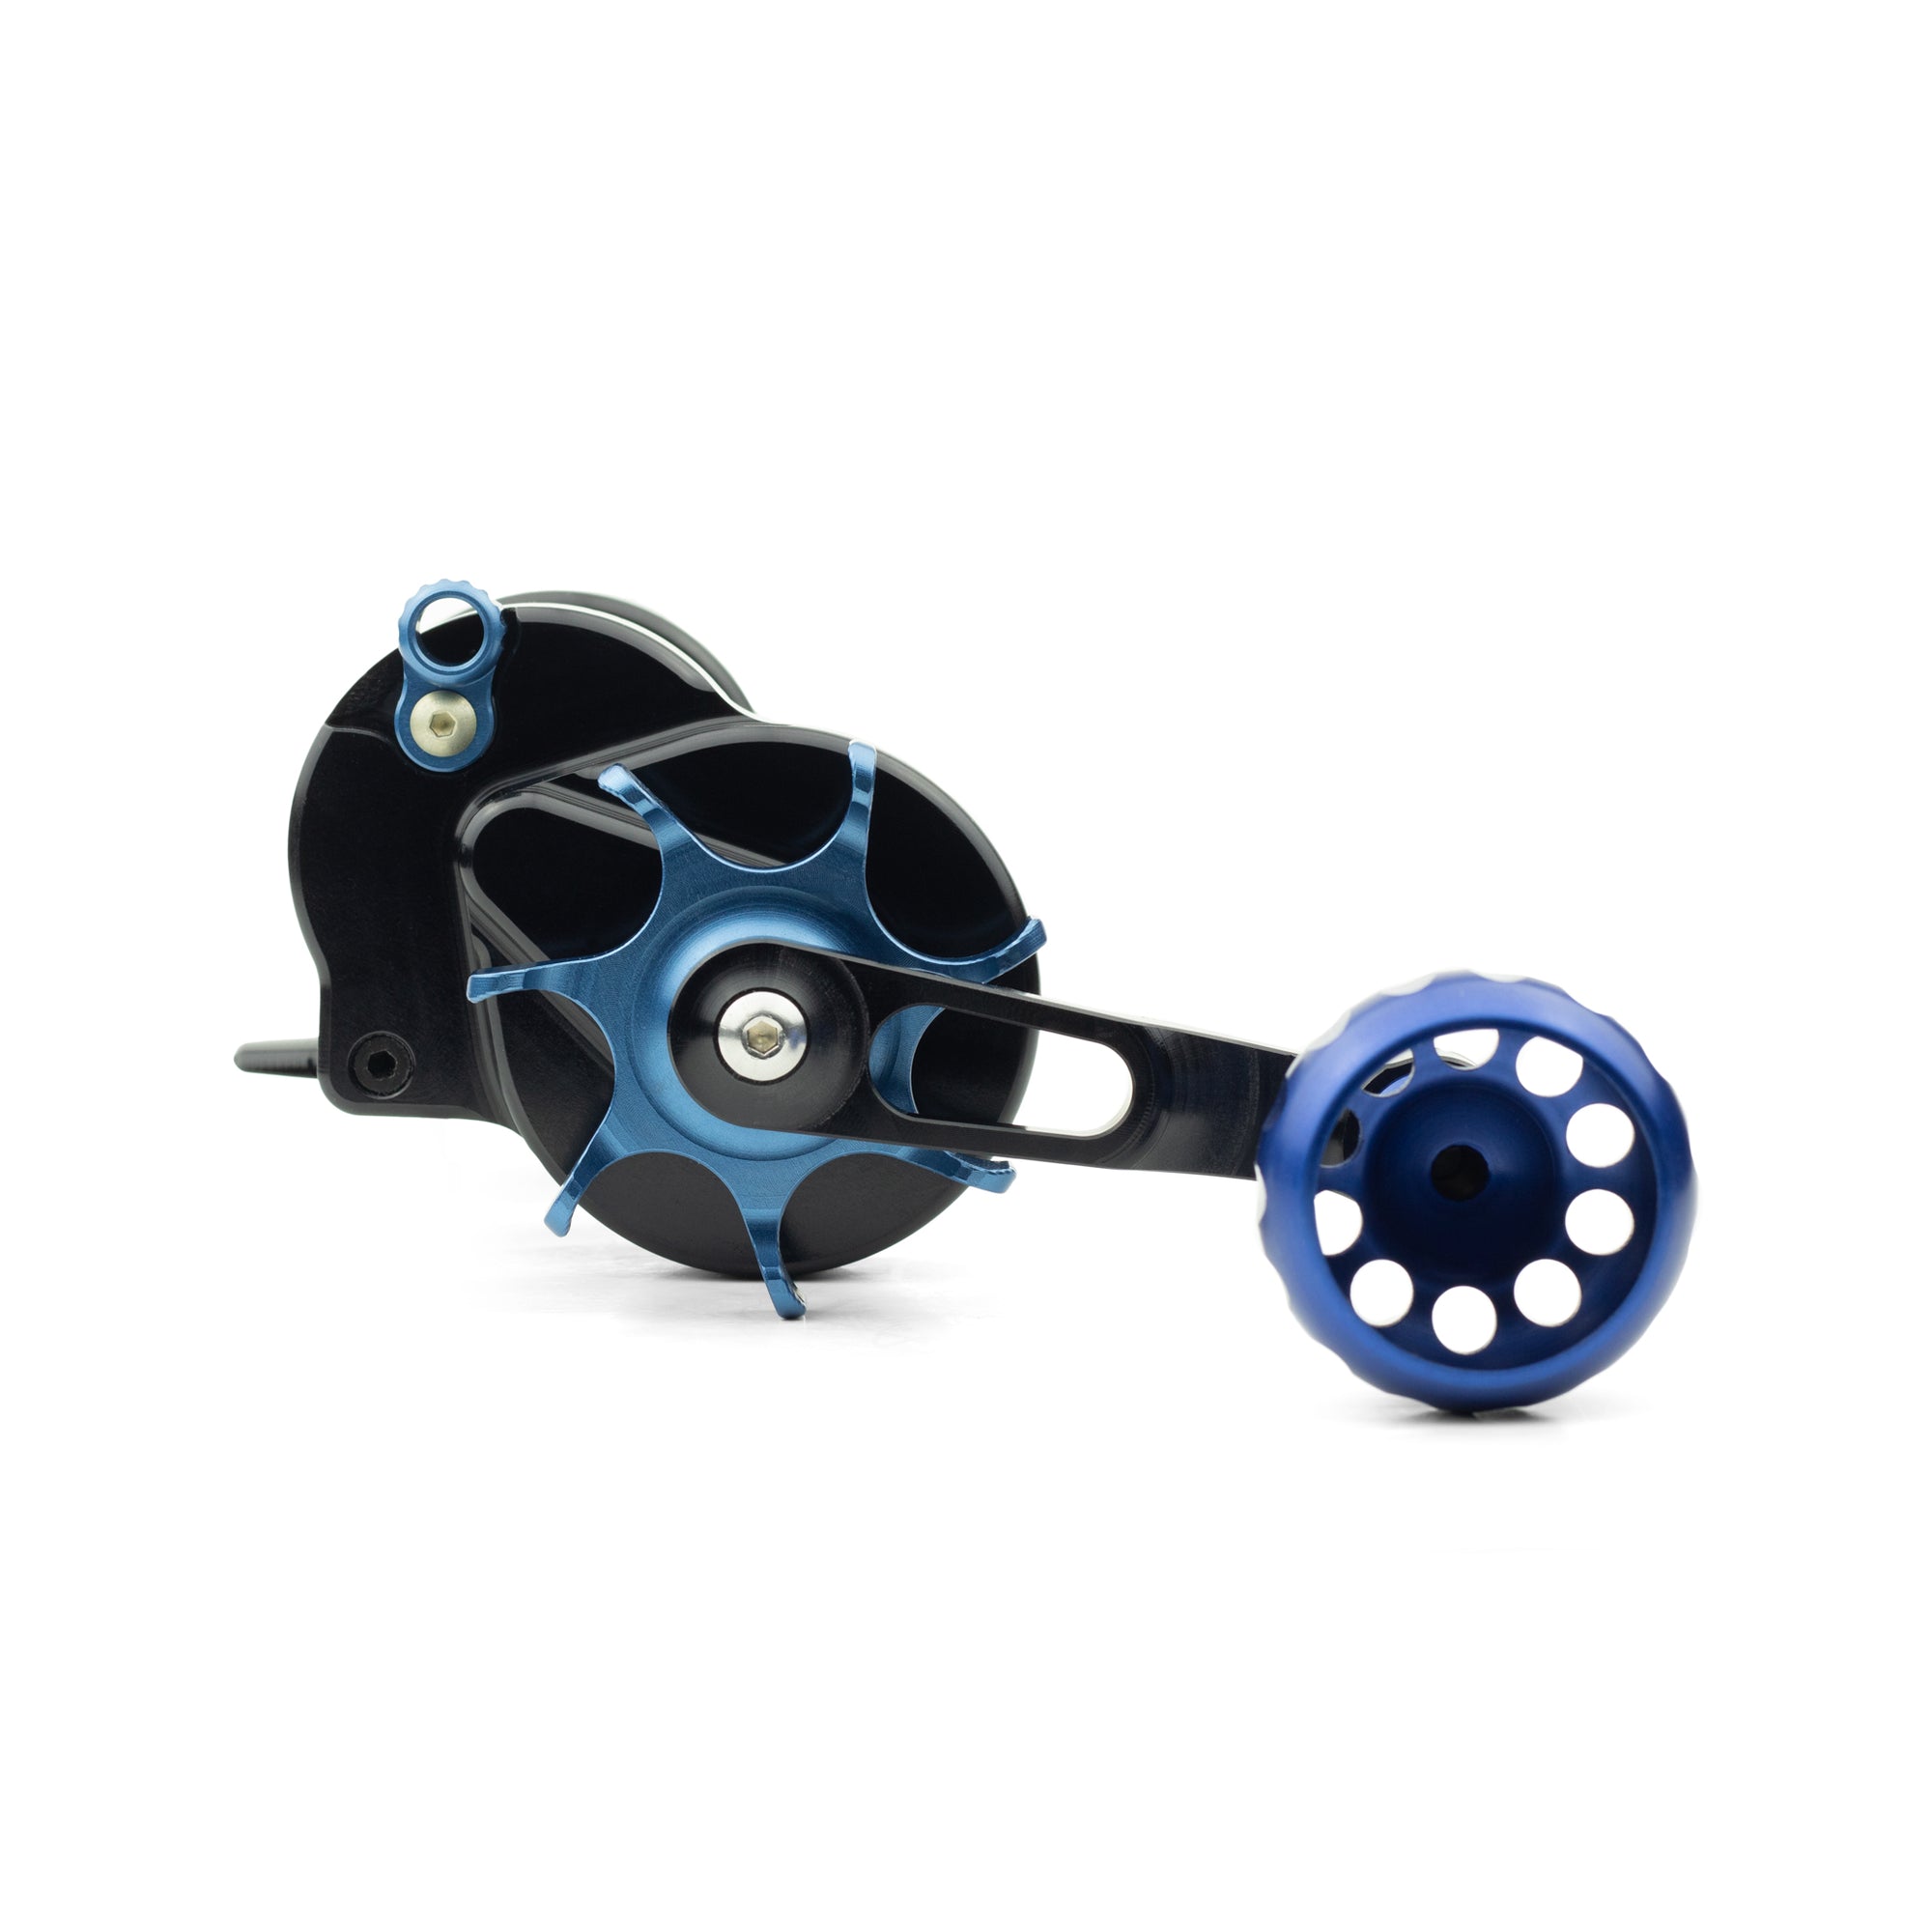 Seigler's star mag fishing reel for surf casting with blue accents. 